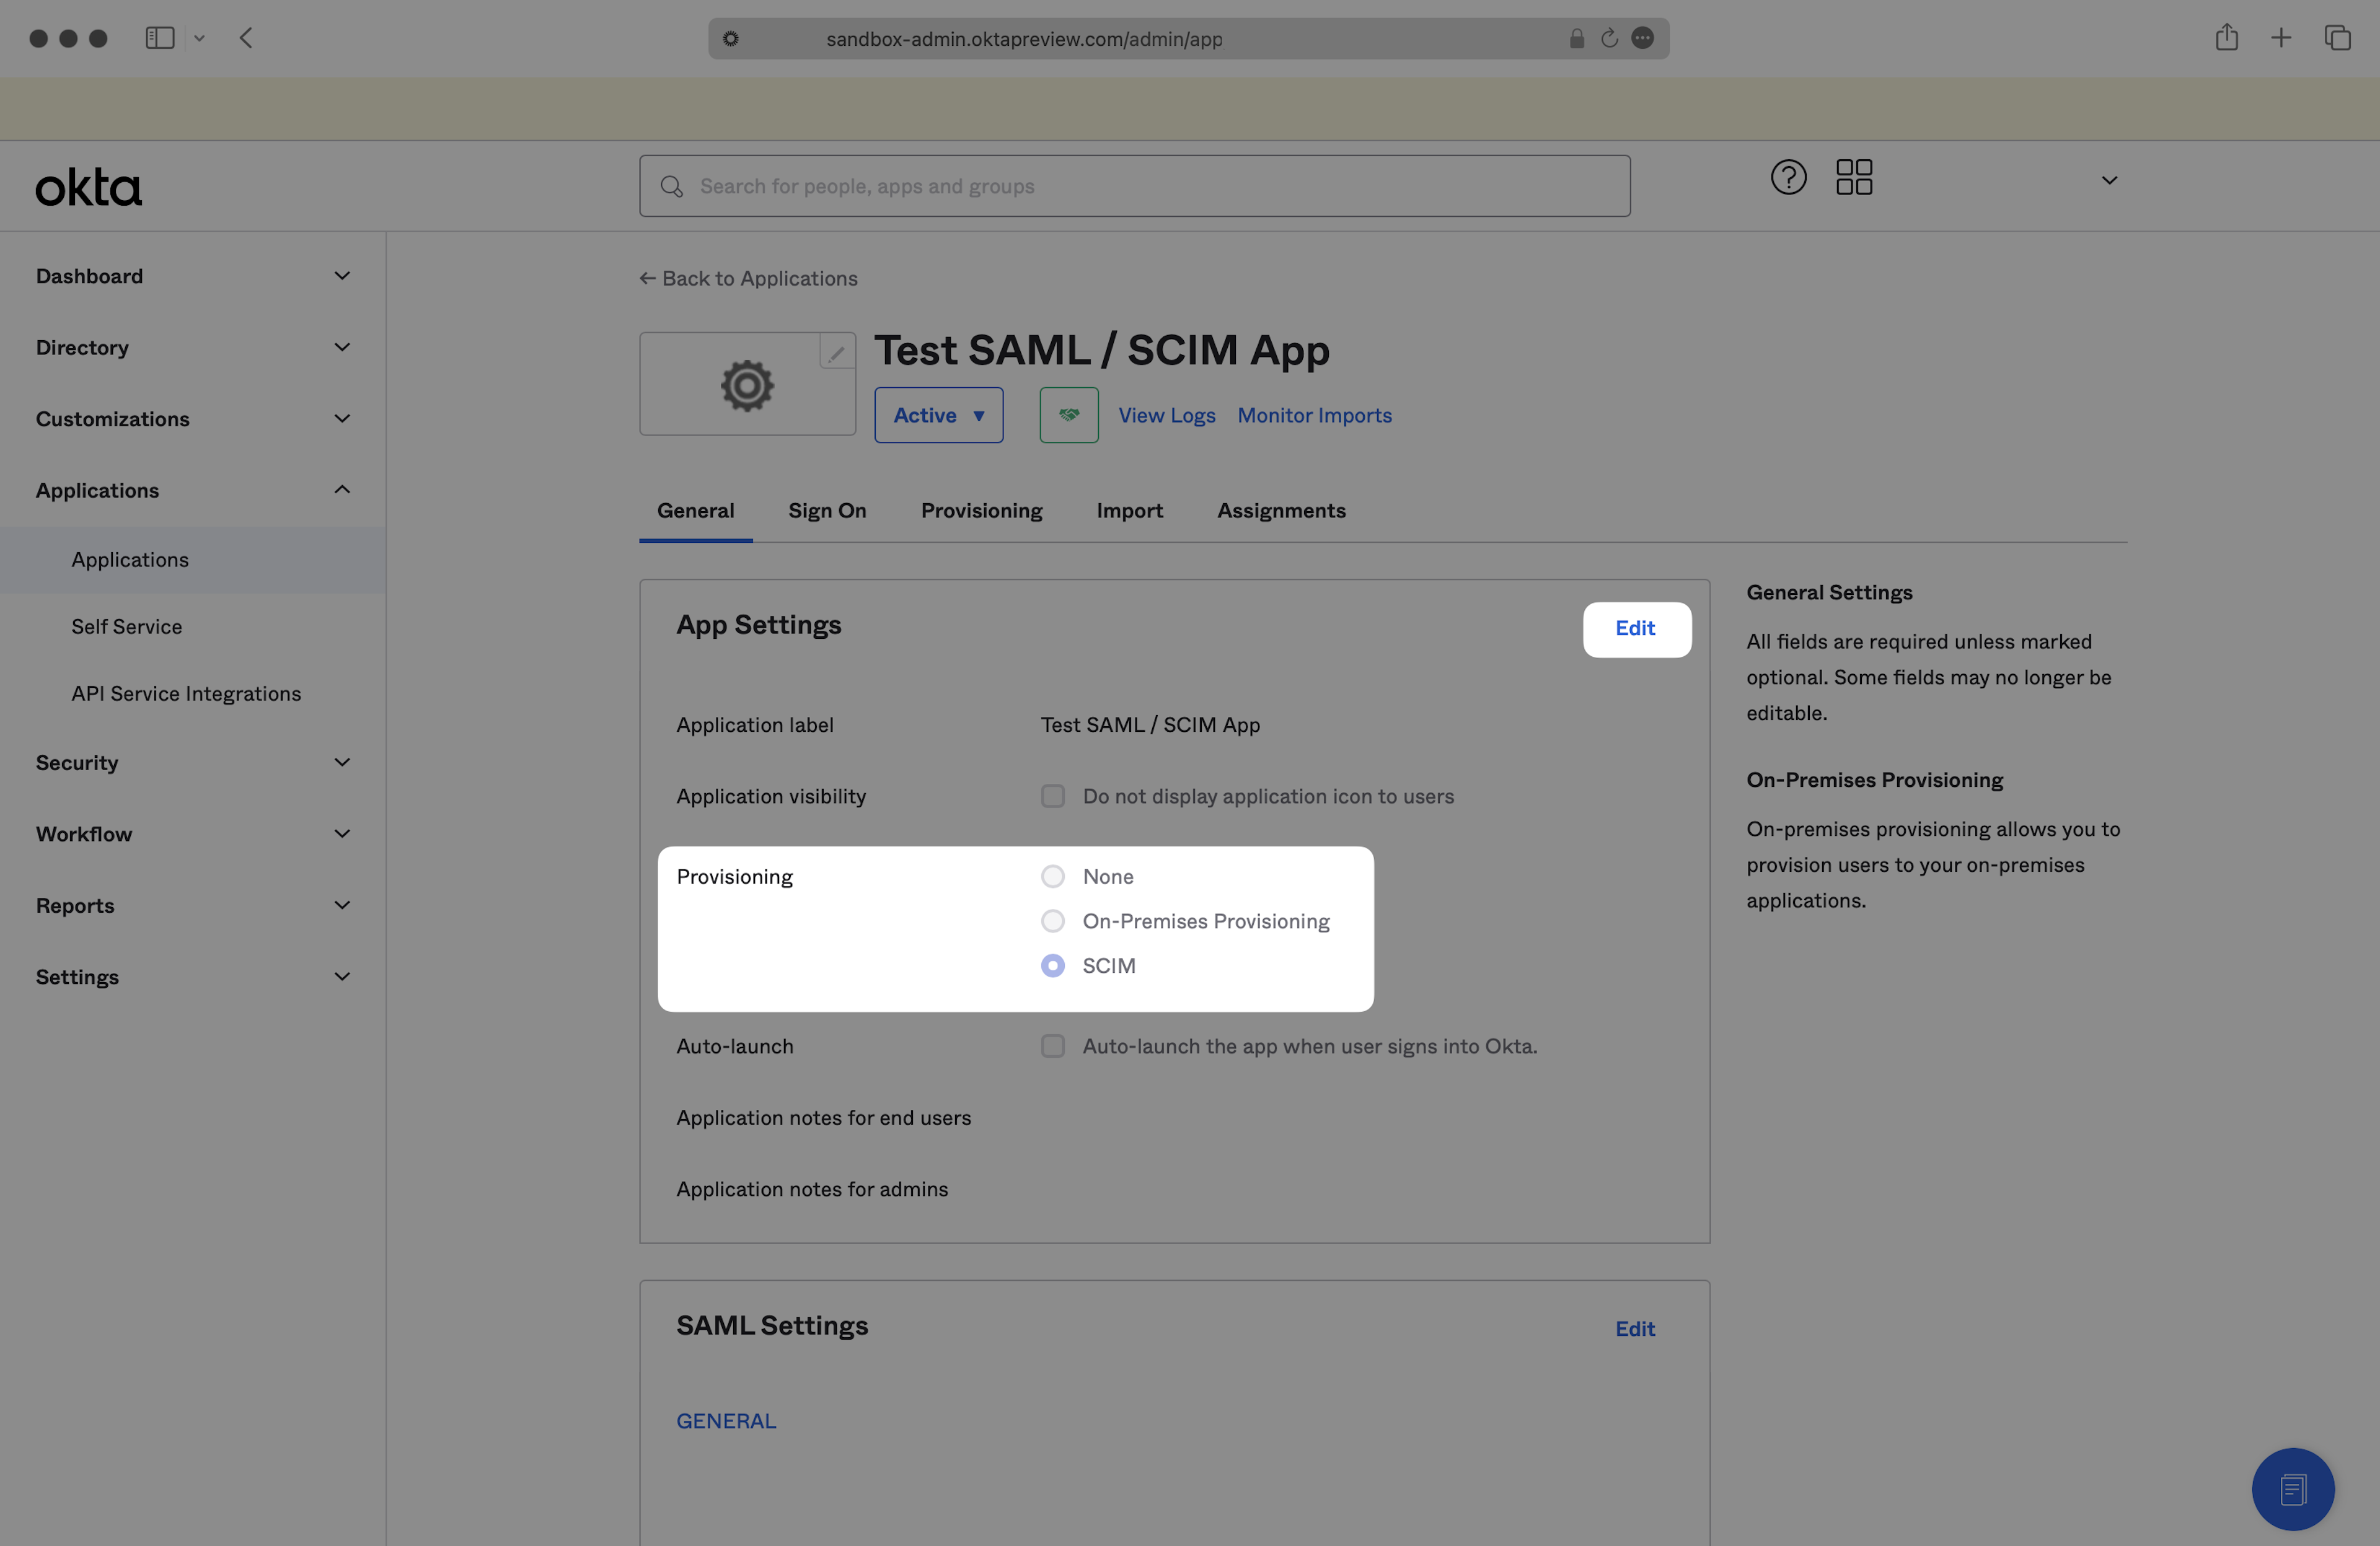 A screenshot showing where to enable SCIM provisioning for an existing SAML app in the Okta dashboard.